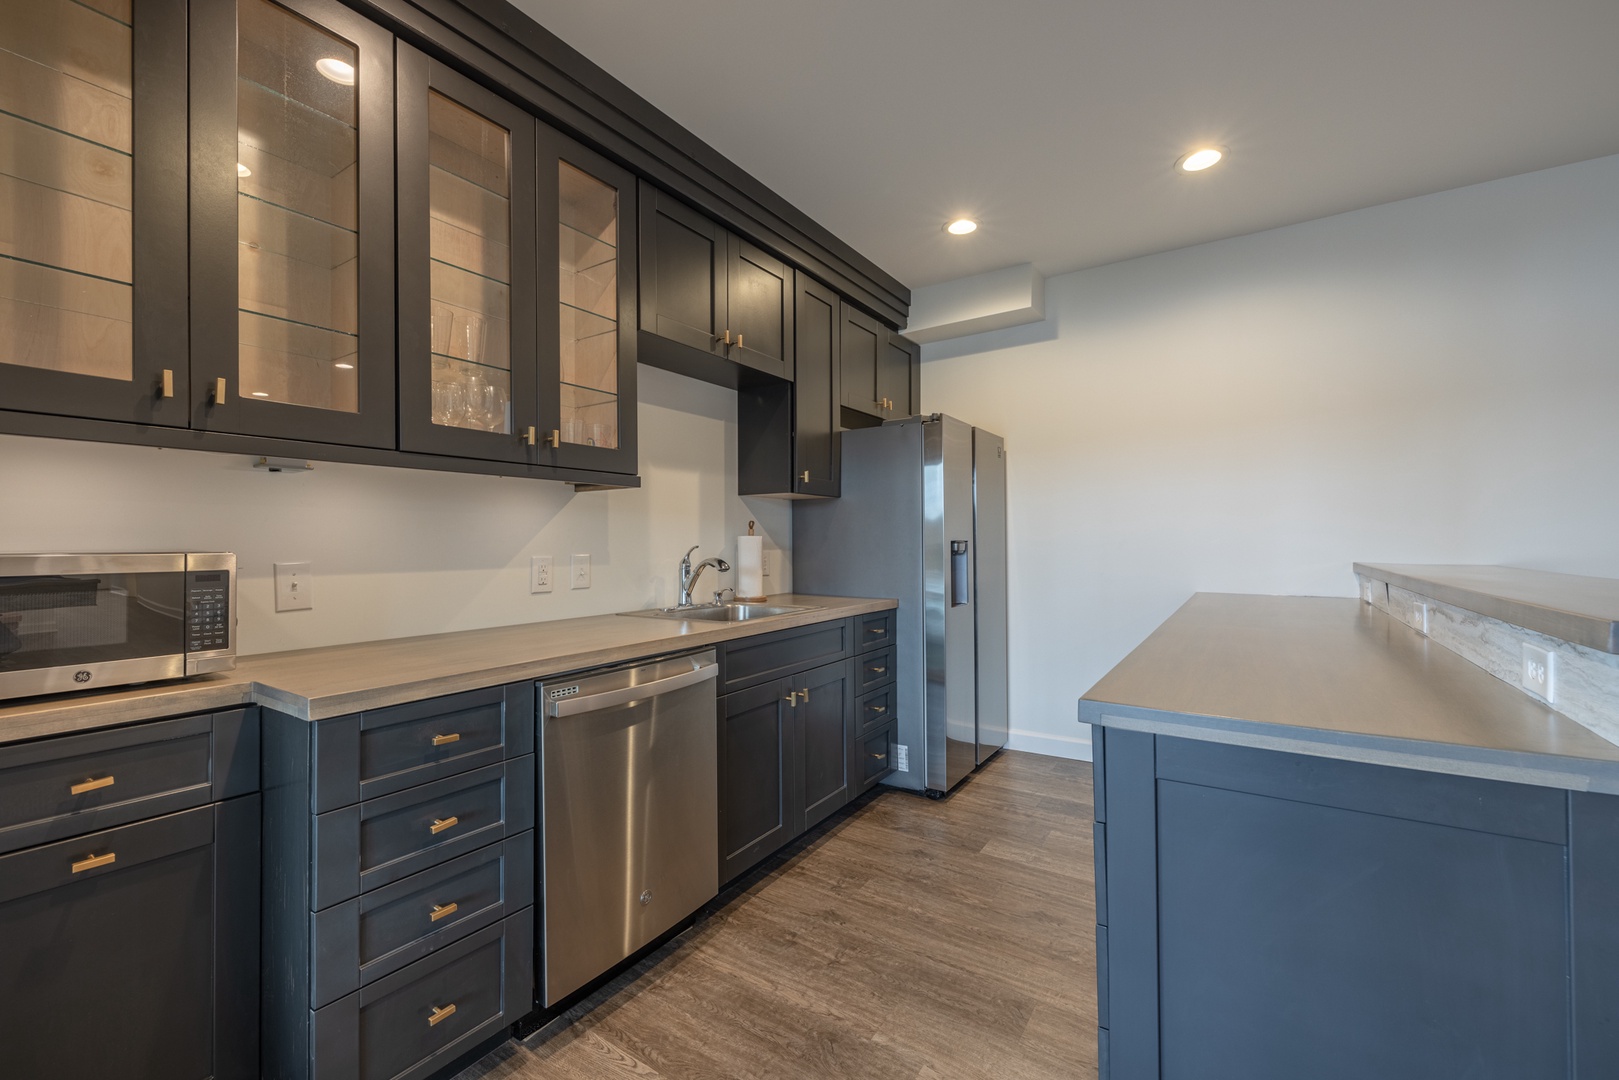 A full kitchen/bar area complete with stainless steel appliances and custom countertops in the lower makes it the ultimate hangout spot